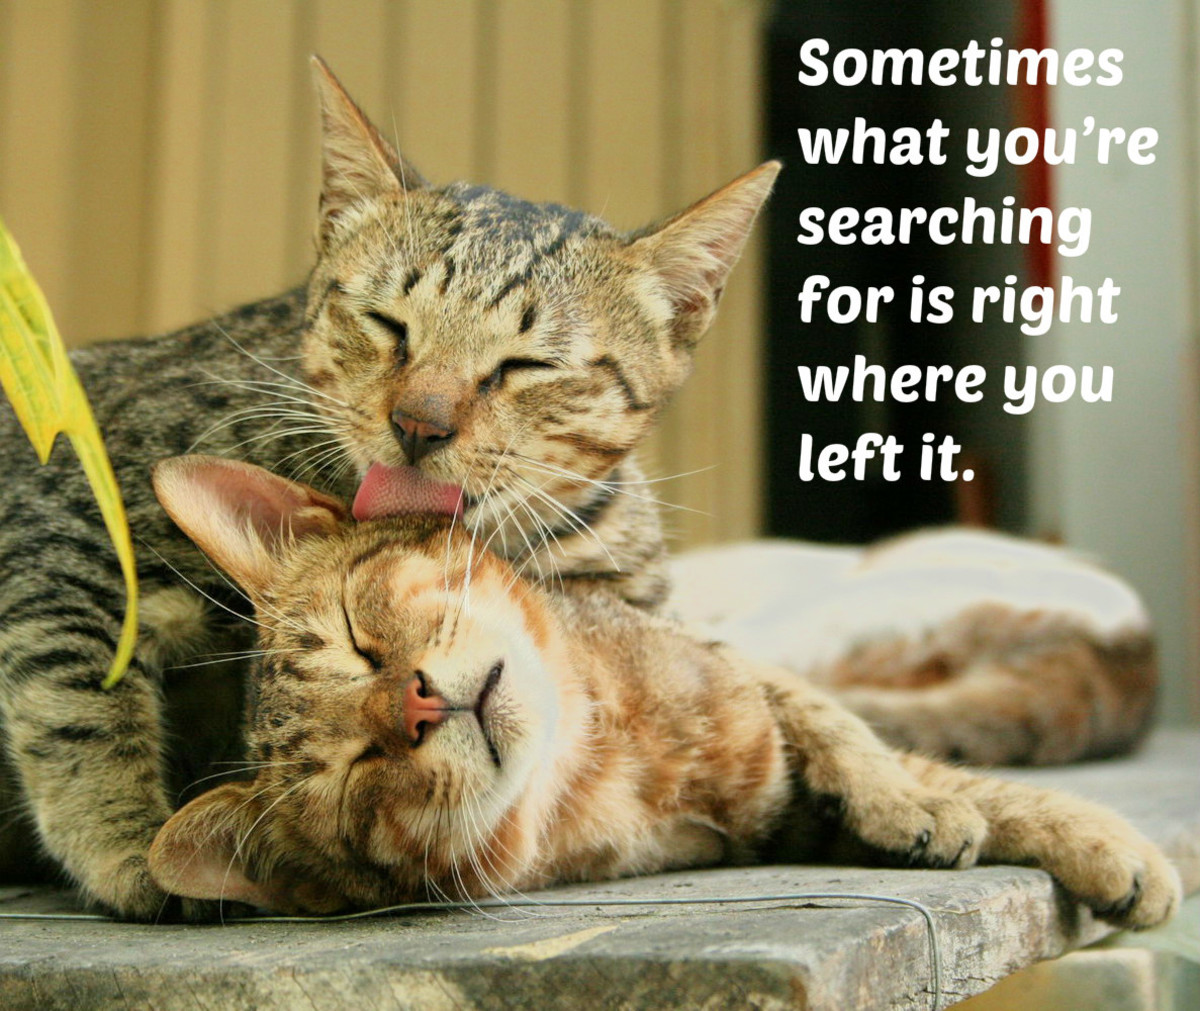 Sometimes what you’re searching for is right where you left it.